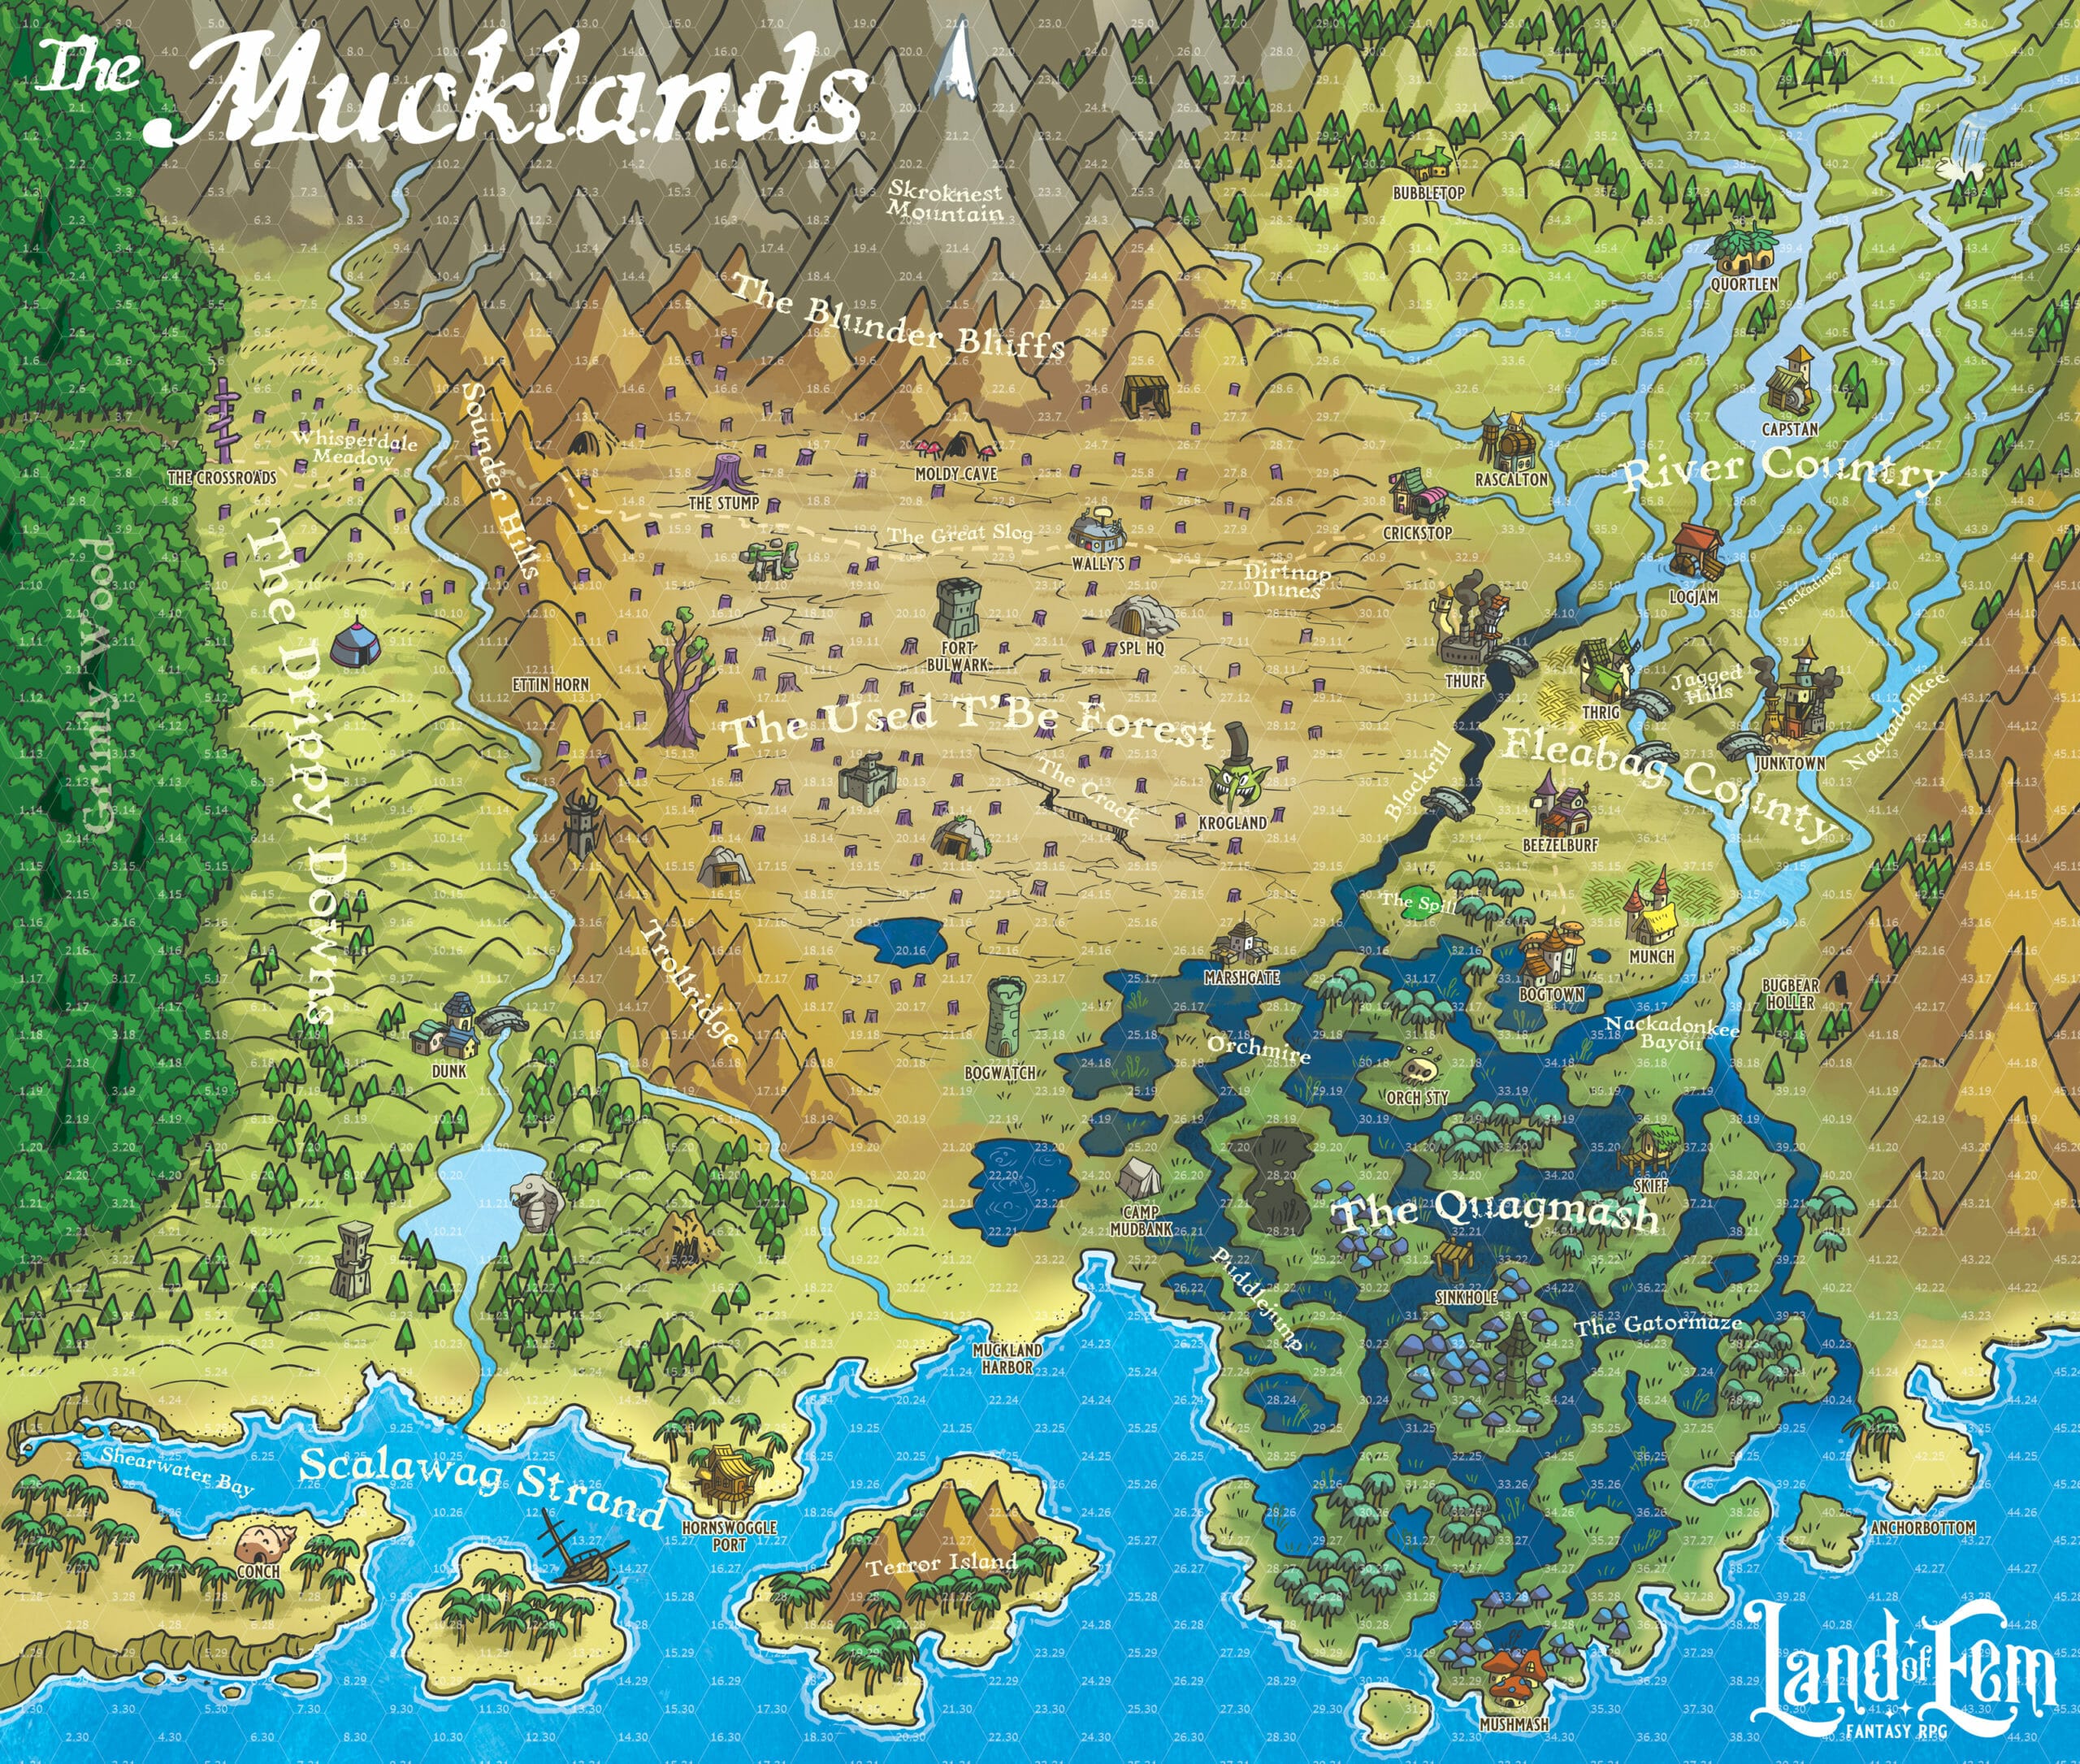 The Mucklands